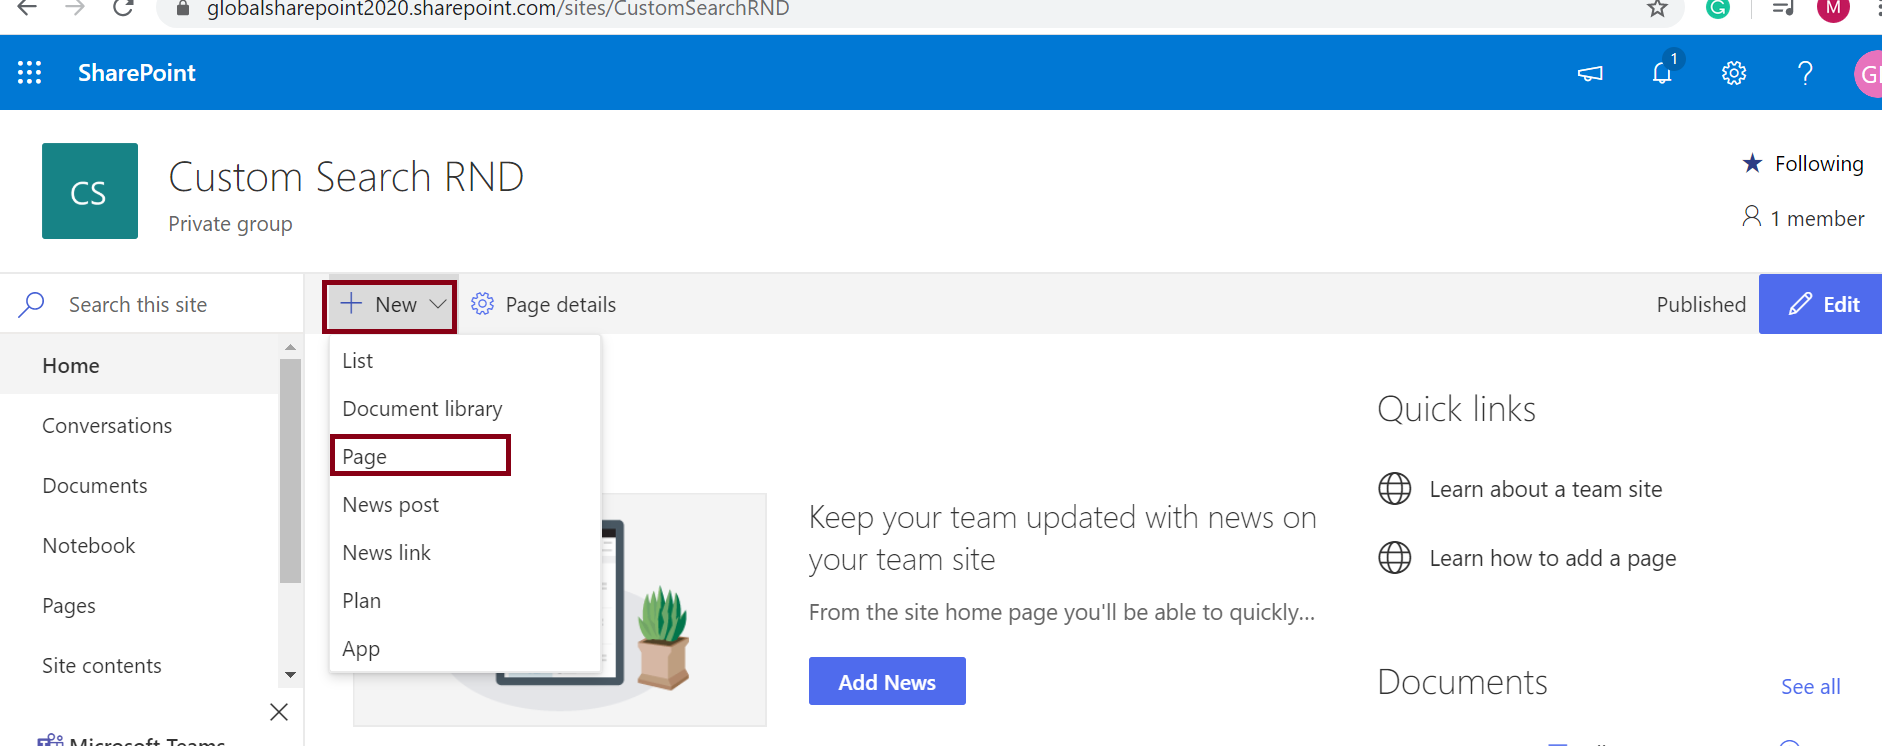 Steps to create a page in SharePoint Online - Click on the New button